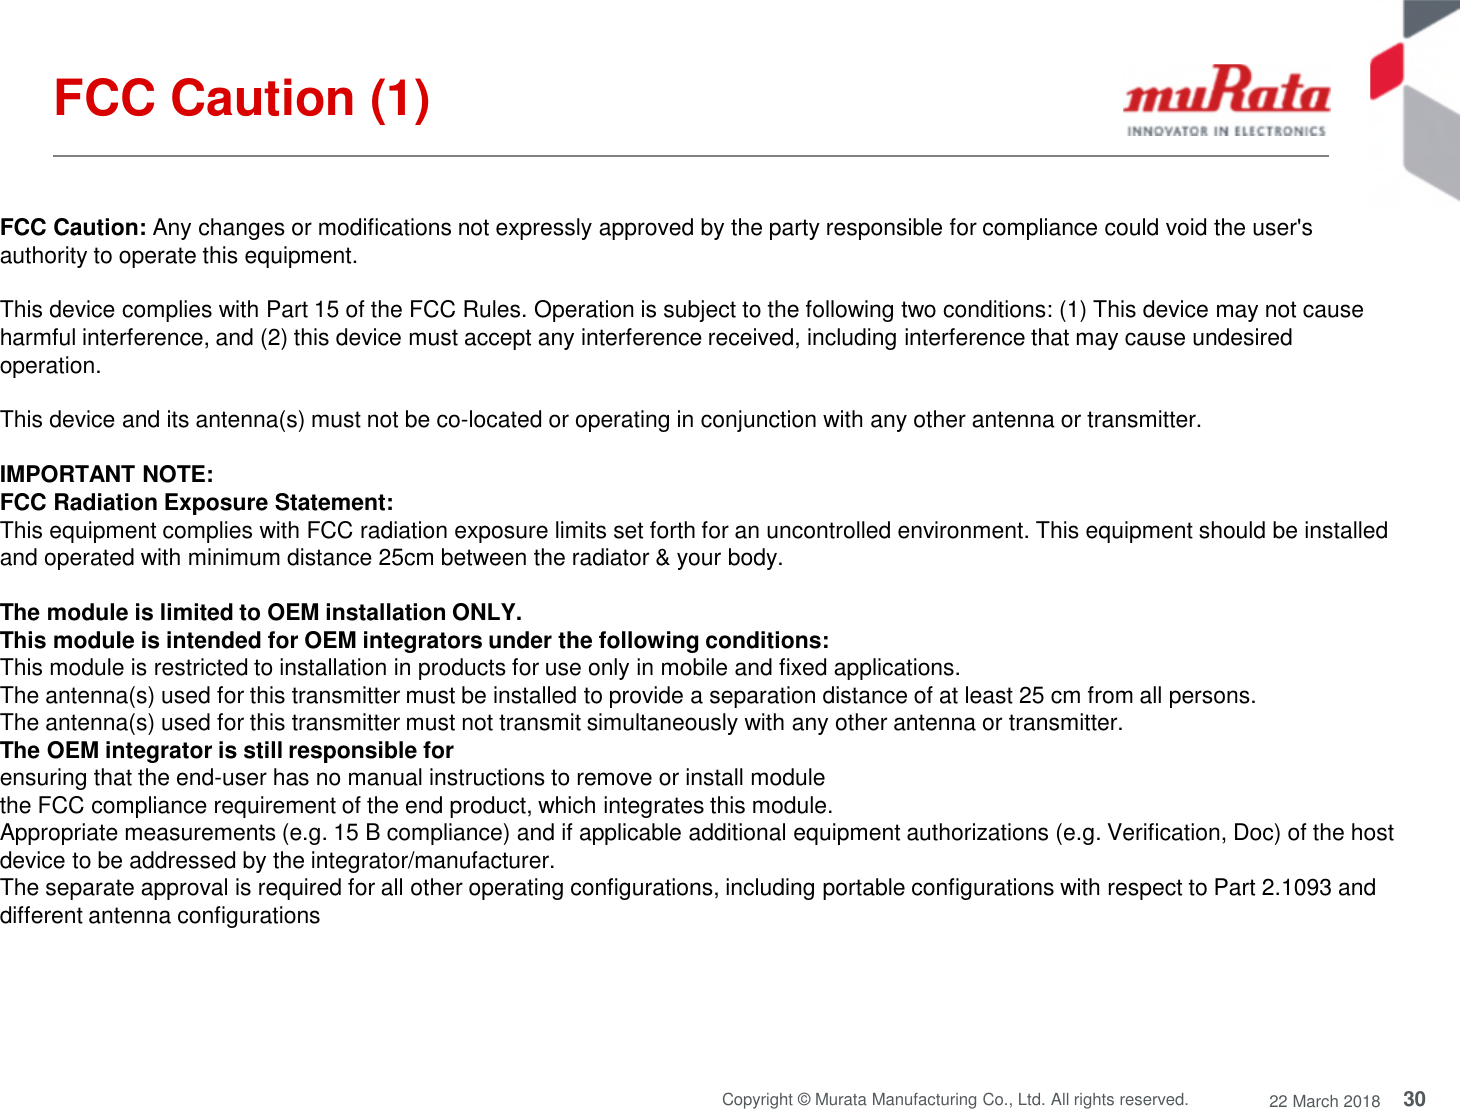 30Copyright © Murata Manufacturing Co., Ltd. All rights reserved. 22 March 2018FCC Caution (1)FCC Caution: Any changes or modifications not expressly approved by the party responsible for compliance could void the user&apos;sauthority to operate this equipment.This device complies with Part 15 of the FCC Rules. Operation is subject to the following two conditions: (1) This device may not causeharmful interference, and (2) this device must accept any interference received, including interference that may cause undesiredoperation.This device and its antenna(s) must not be co-located or operating in conjunction with any other antenna or transmitter.IMPORTANT NOTE:FCC Radiation Exposure Statement:This equipment complies with FCC radiation exposure limits set forth for an uncontrolled environment. This equipment should be installedand operated with minimum distance 25cm between the radiator &amp; your body.The module is limited to OEM installation ONLY.This module is intended for OEM integrators under the following conditions:This module is restricted to installation in products for use only in mobile and fixed applications.The antenna(s) used for this transmitter must be installed to provide a separation distance of at least 25 cm from all persons.The antenna(s) used for this transmitter must not transmit simultaneously with any other antenna or transmitter.The OEM integrator is still responsible forensuring that the end-user has no manual instructions to remove or install modulethe FCC compliance requirement of the end product, which integrates this module.Appropriate measurements (e.g. 15 B compliance) and if applicable additional equipment authorizations (e.g. Verification, Doc) of the hostdevice to be addressed by the integrator/manufacturer.The separate approval is required for all other operating configurations, including portable configurations with respect to Part 2.1093 anddifferent antenna configurations